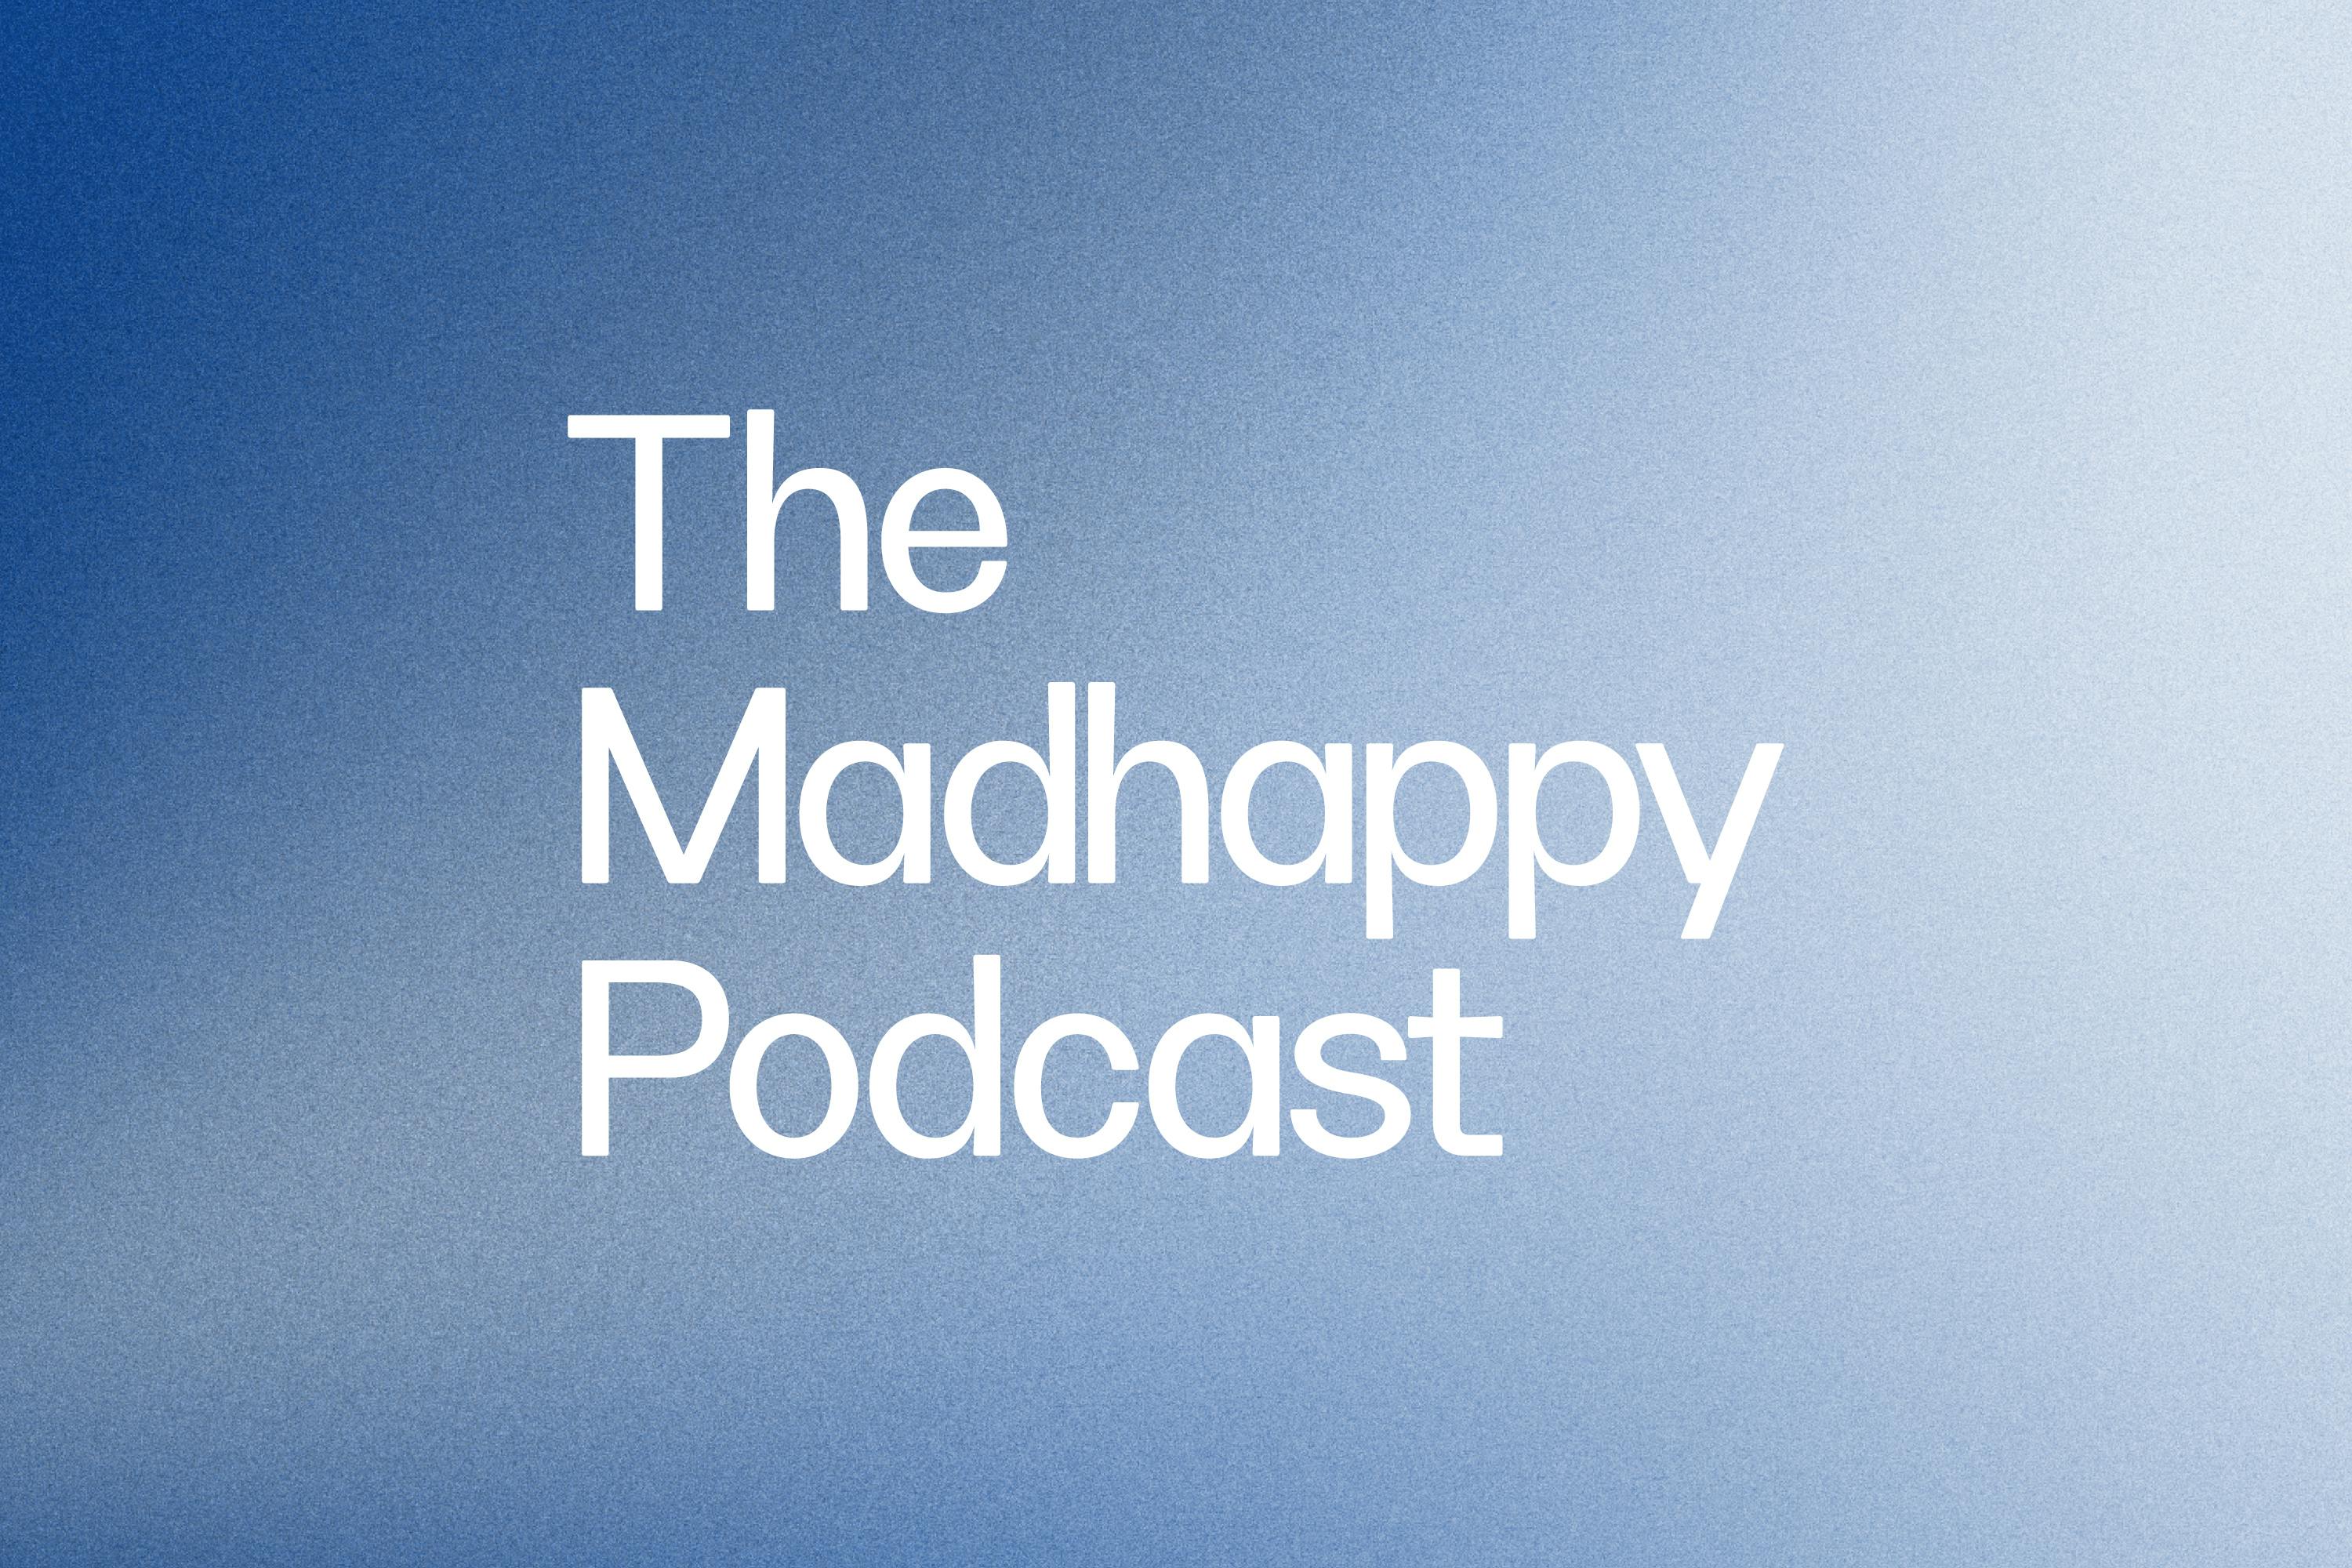 The Madhappy Podcast